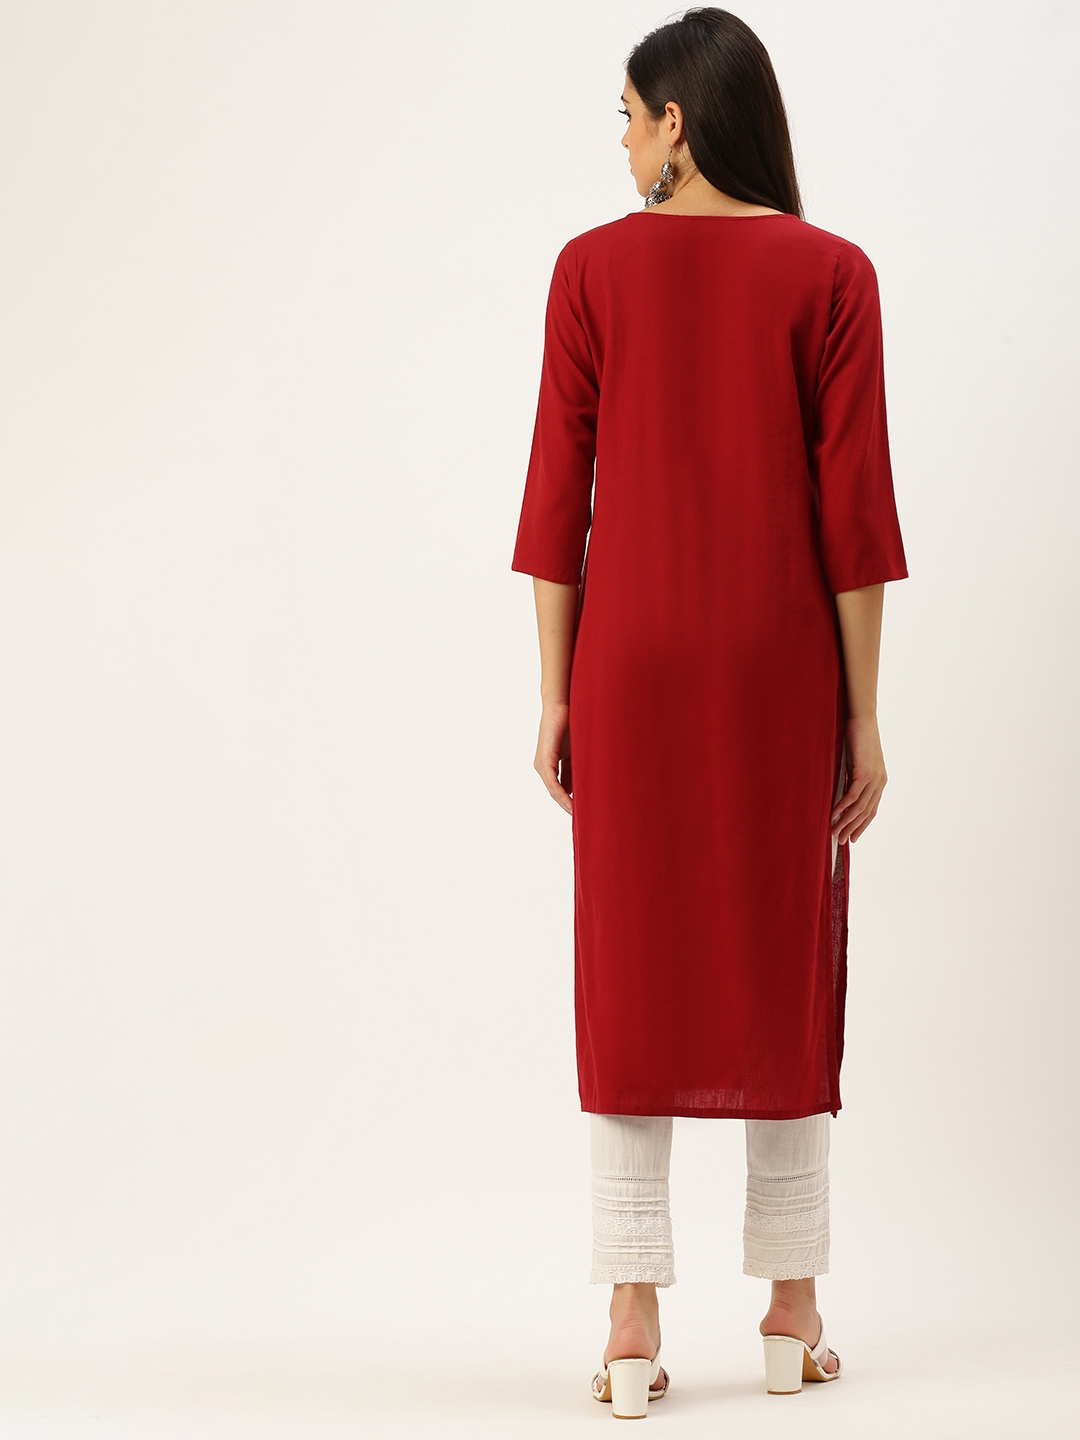 Women's Red Cotton Embroidered Comfort Fit Kurtas